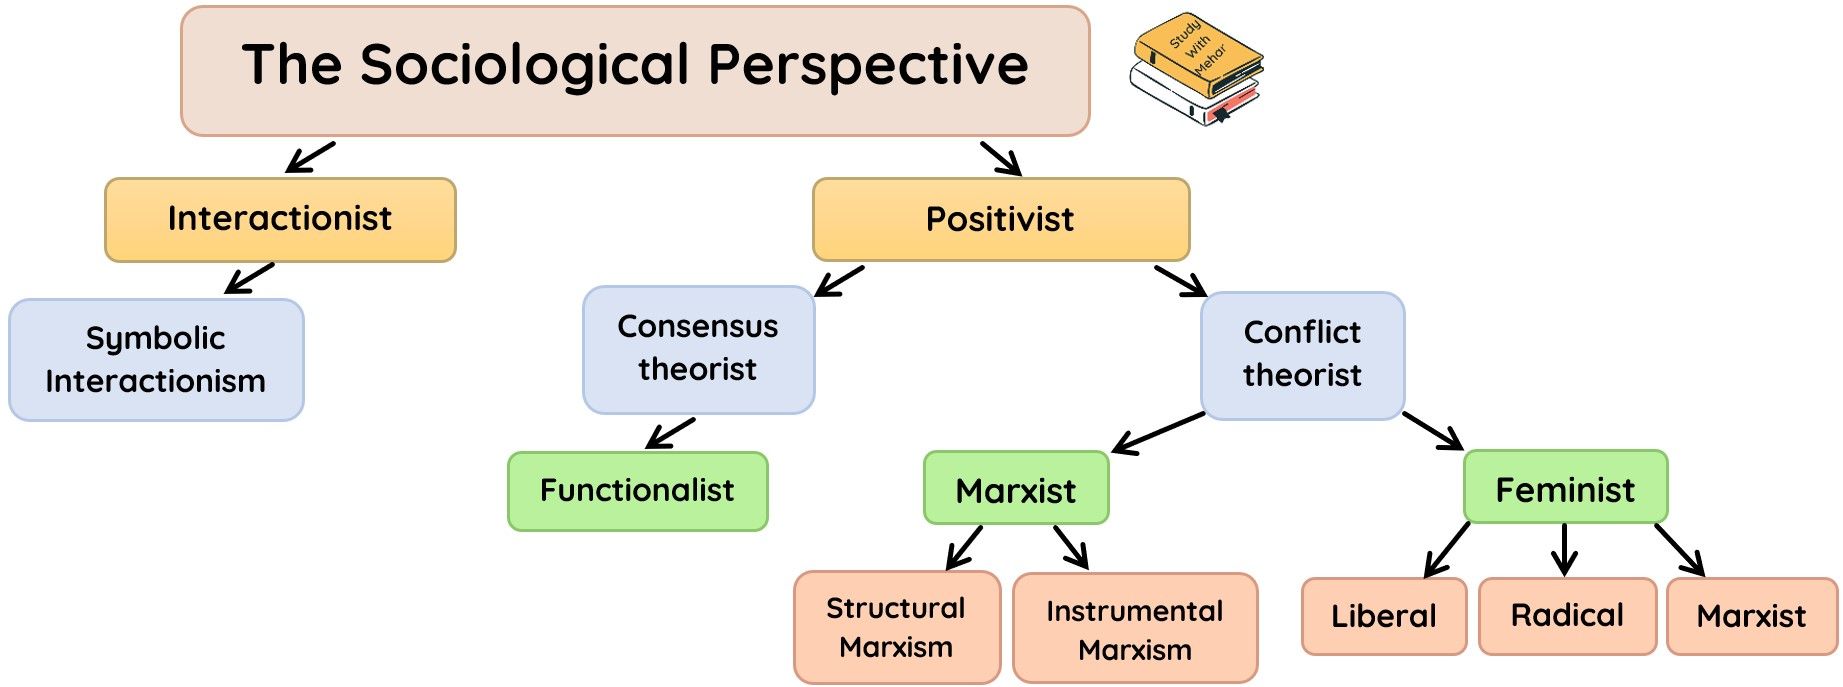 research paper sociological perspectives